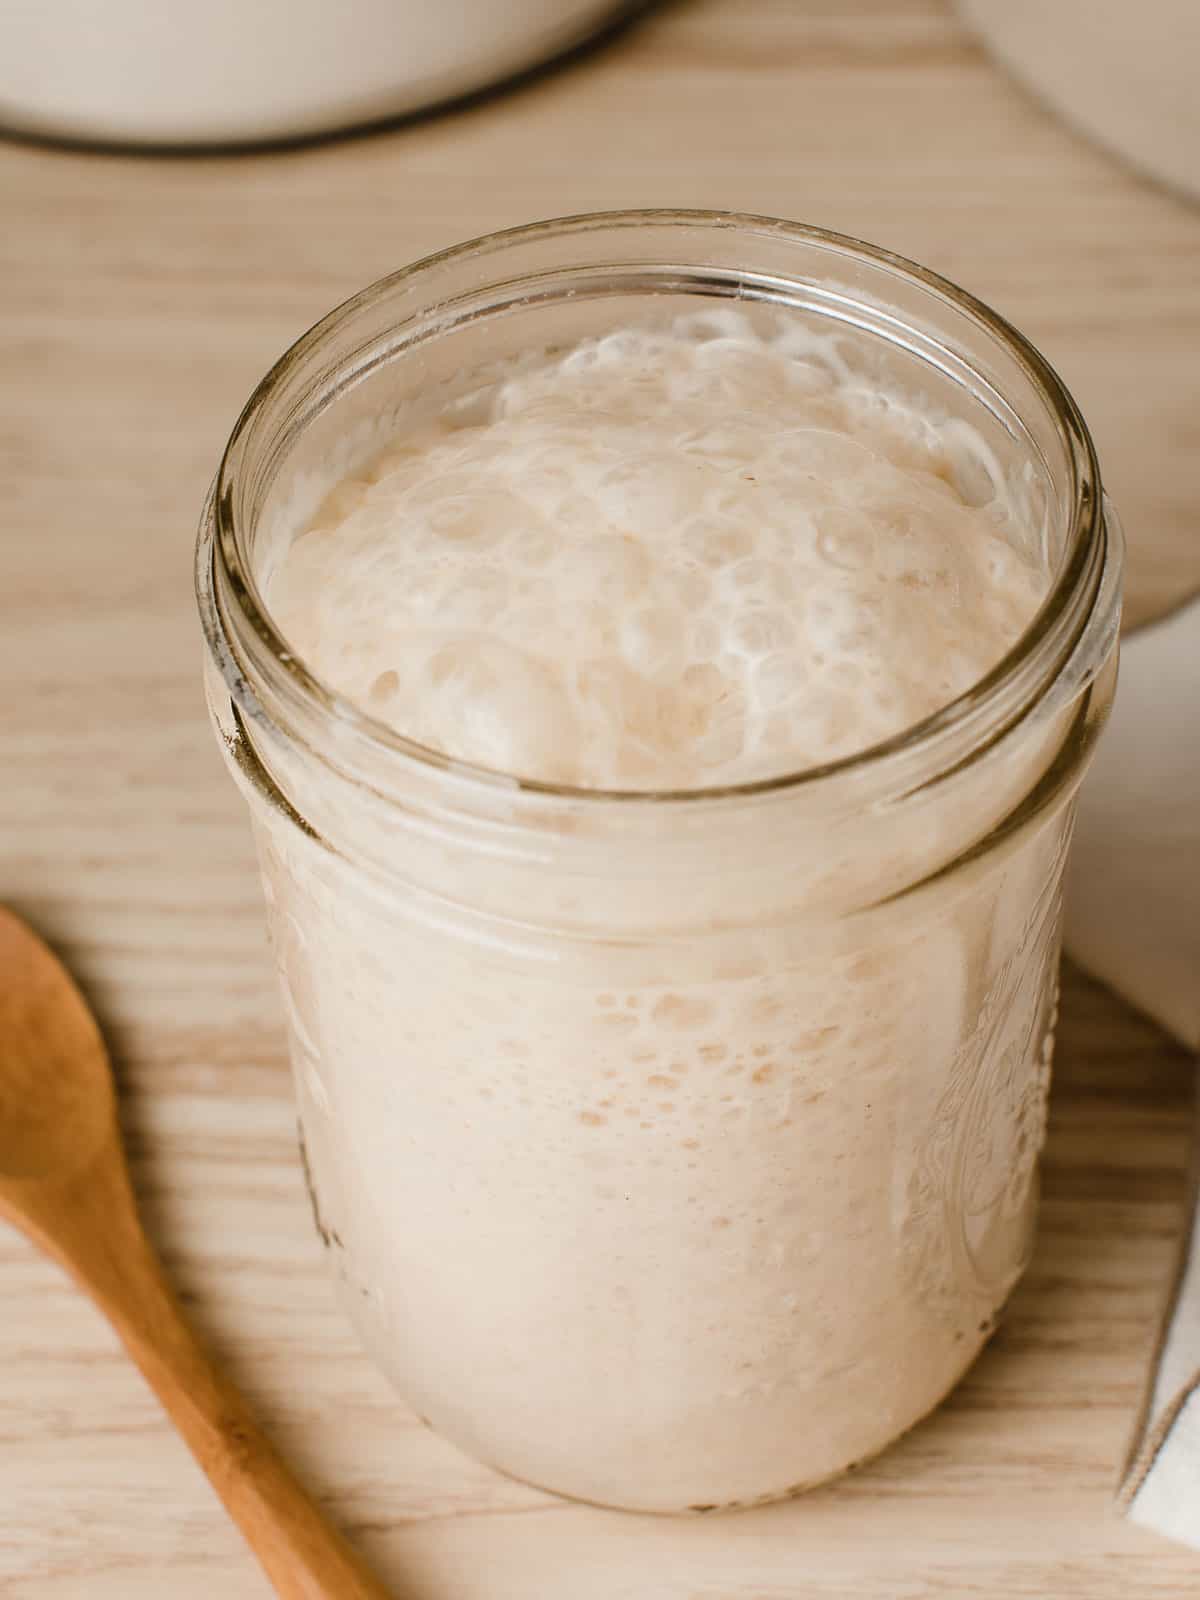 A jar of active sourdough starter resting on a kitchen counter.